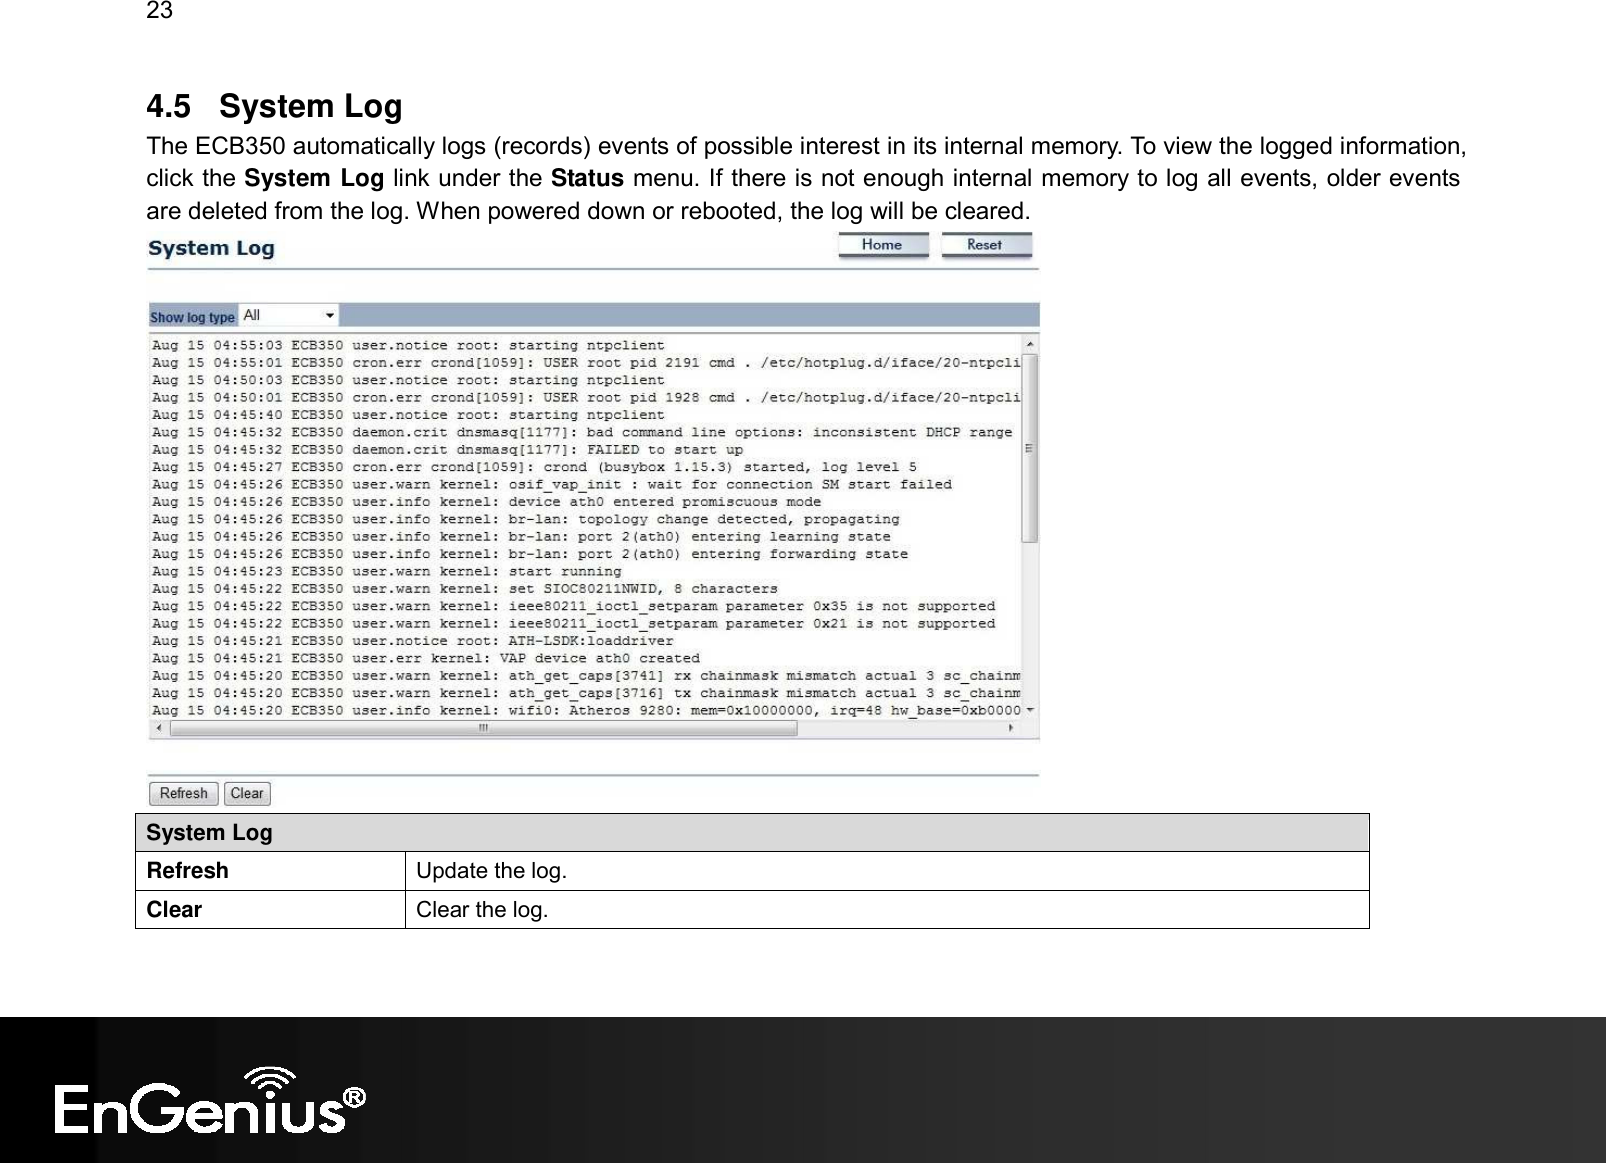 23  4.5  System Log The ECB350 automatically logs (records) events of possible interest in its internal memory. To view the logged information, click the System Log link under the Status menu. If there is not enough internal memory to log all events, older events are deleted from the log. When powered down or rebooted, the log will be cleared.  System Log Refresh  Update the log. Clear  Clear the log.  